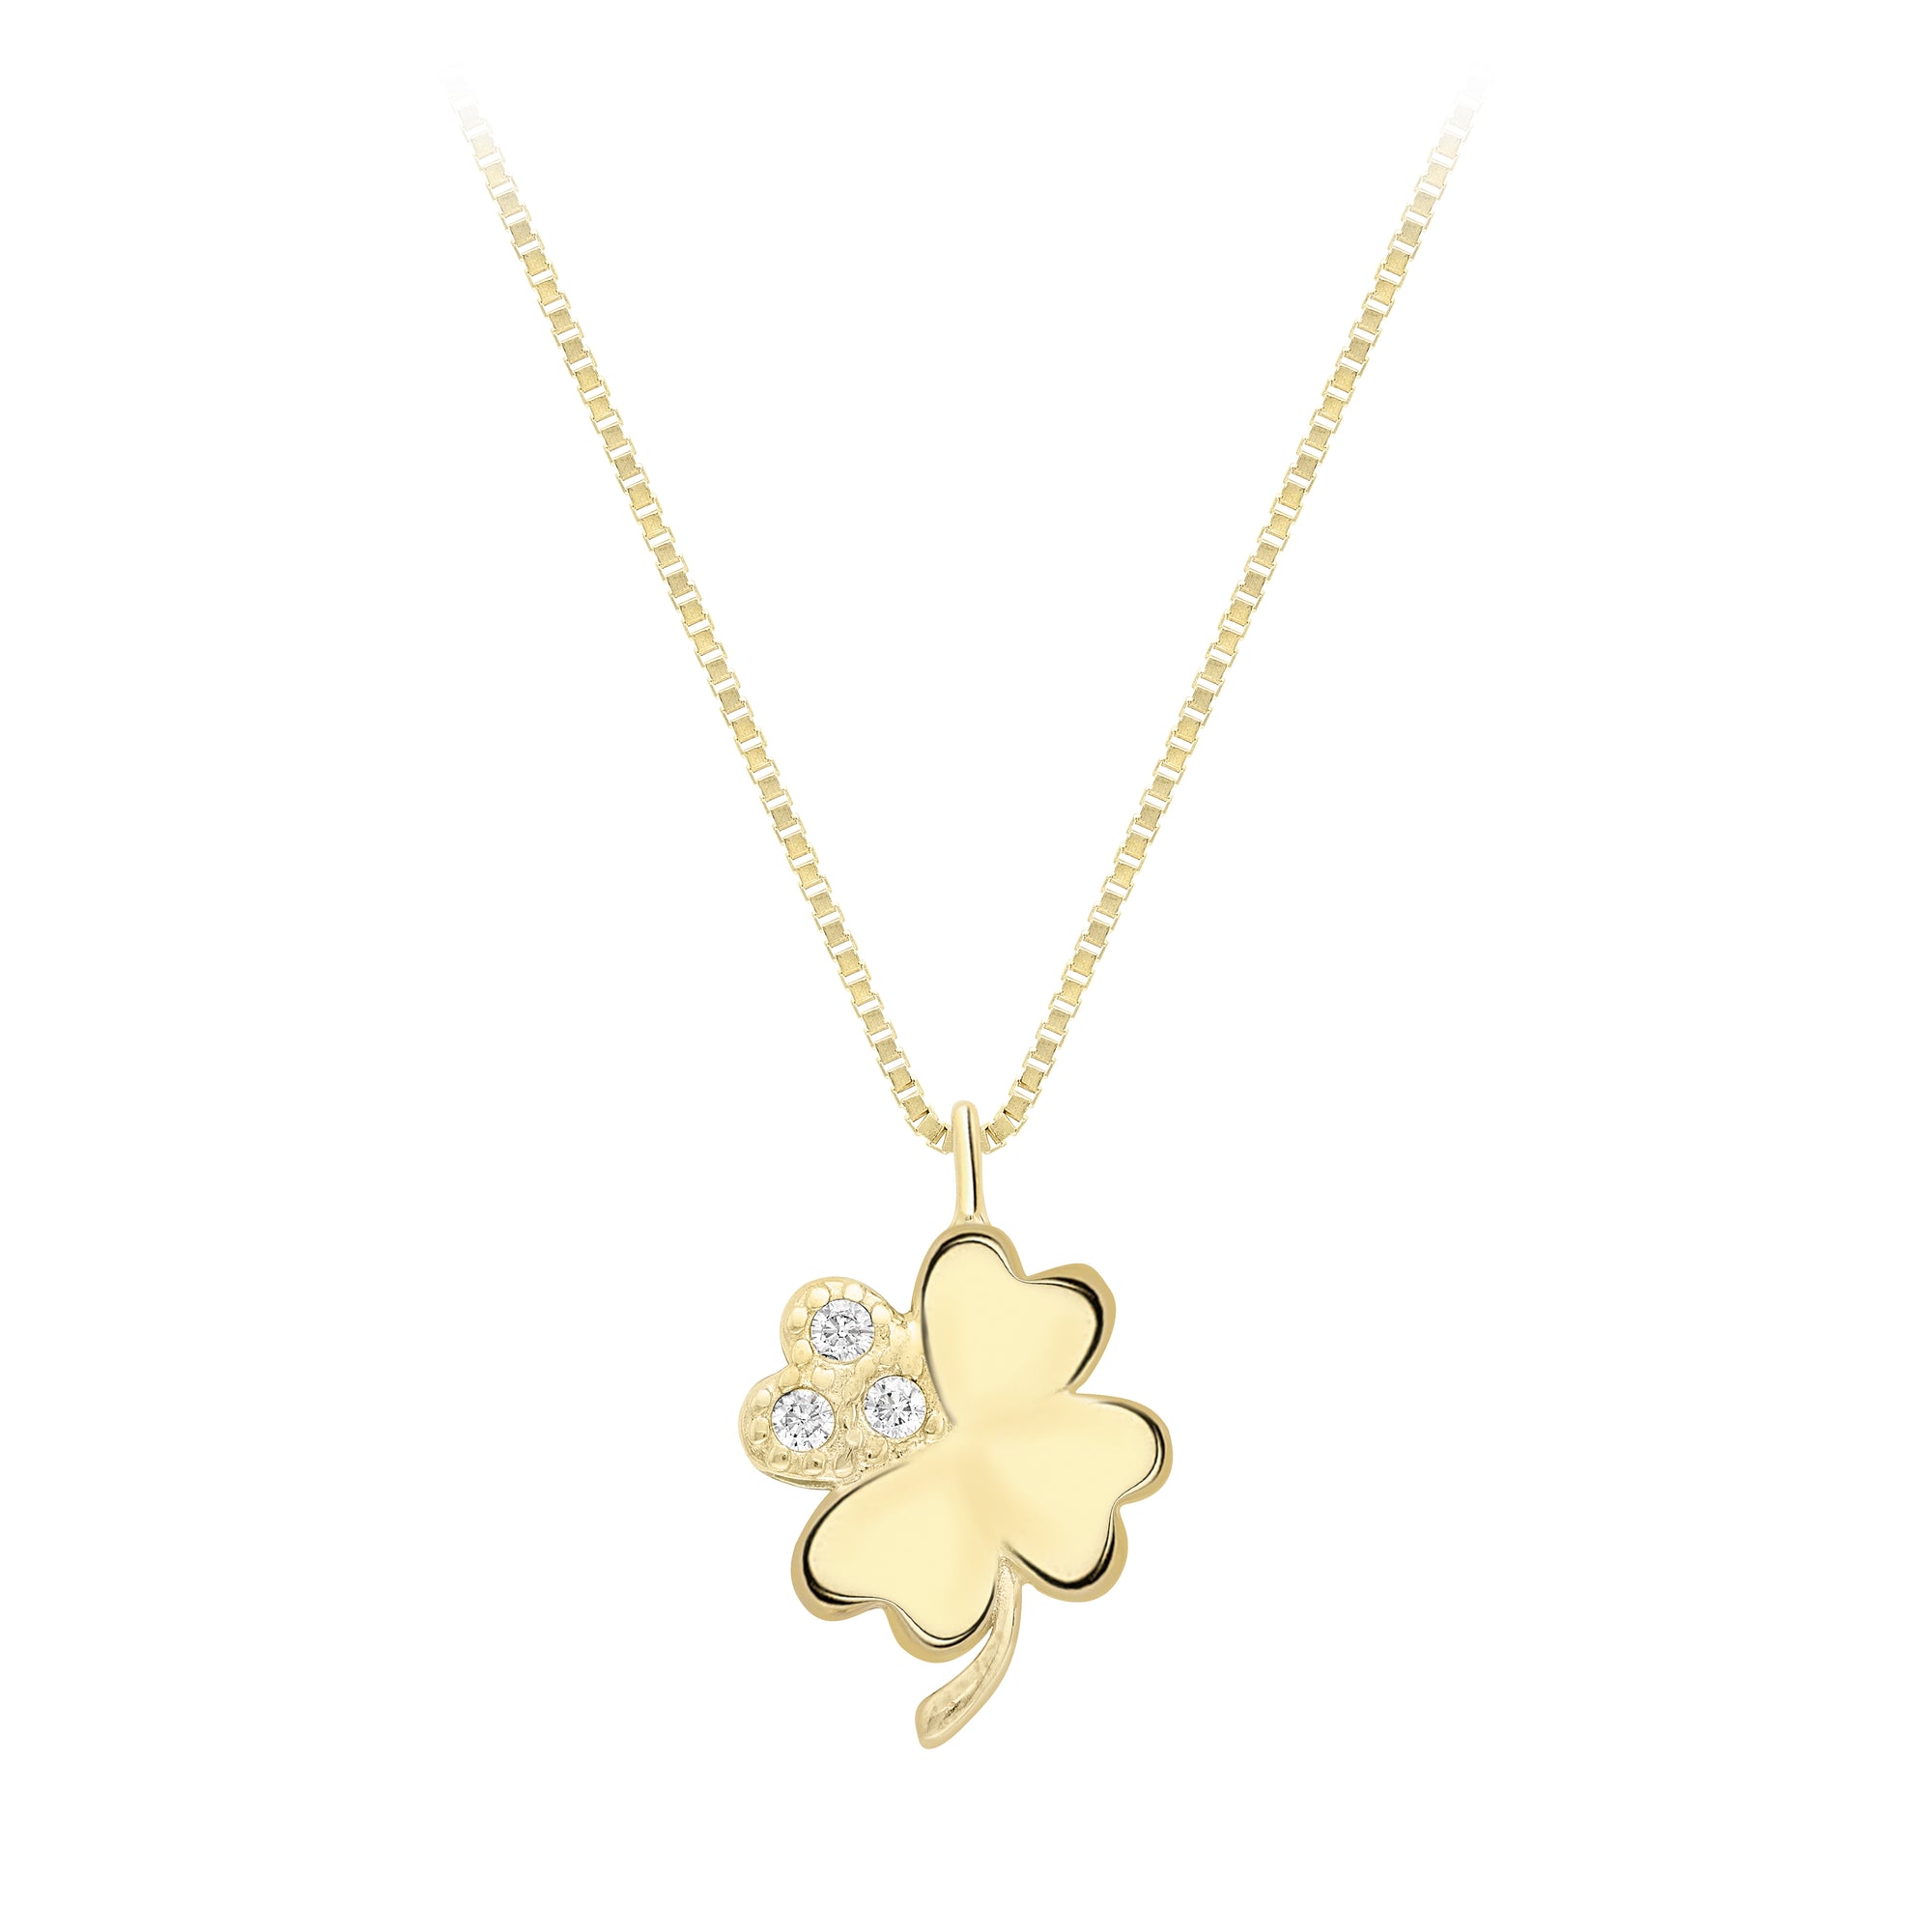 Gold and Cubic Zirconia Four Leaf Clover Pendant and Chain